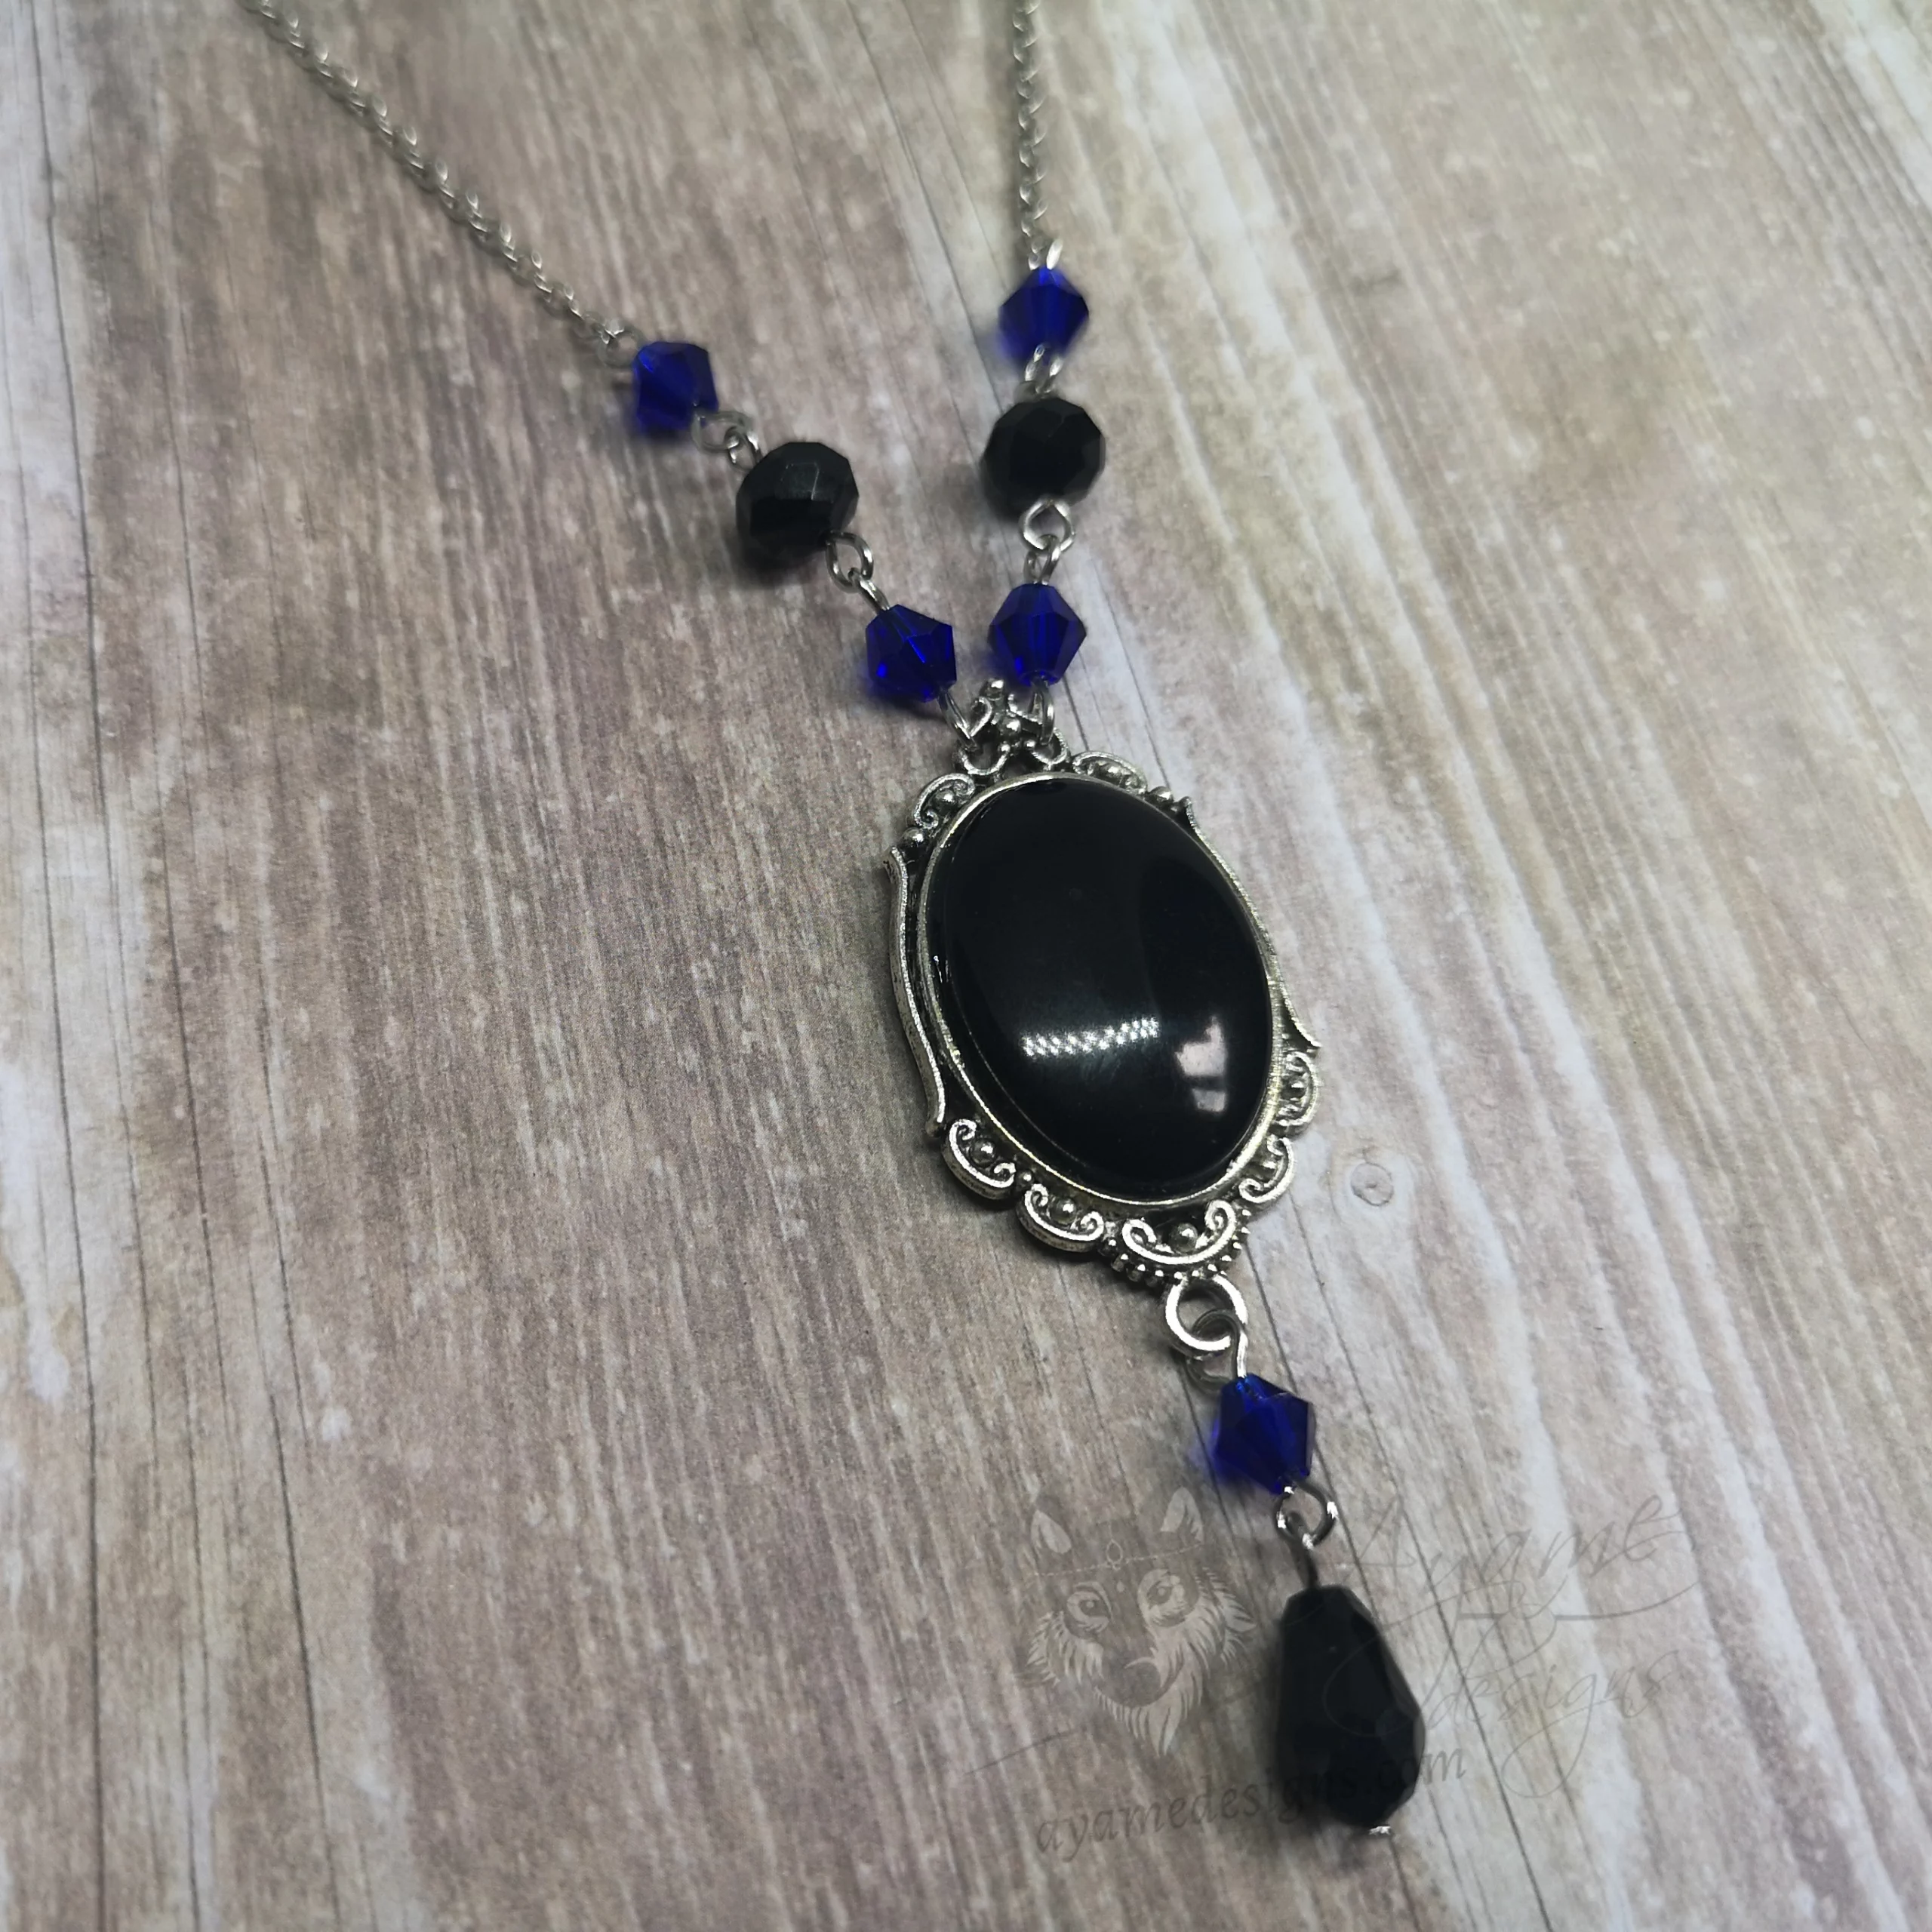 Handmade adjustable gothic necklace with a black resin cabochon in a silver filigree frame, black and blue Austrian crystal beads and silver stainless steel chain